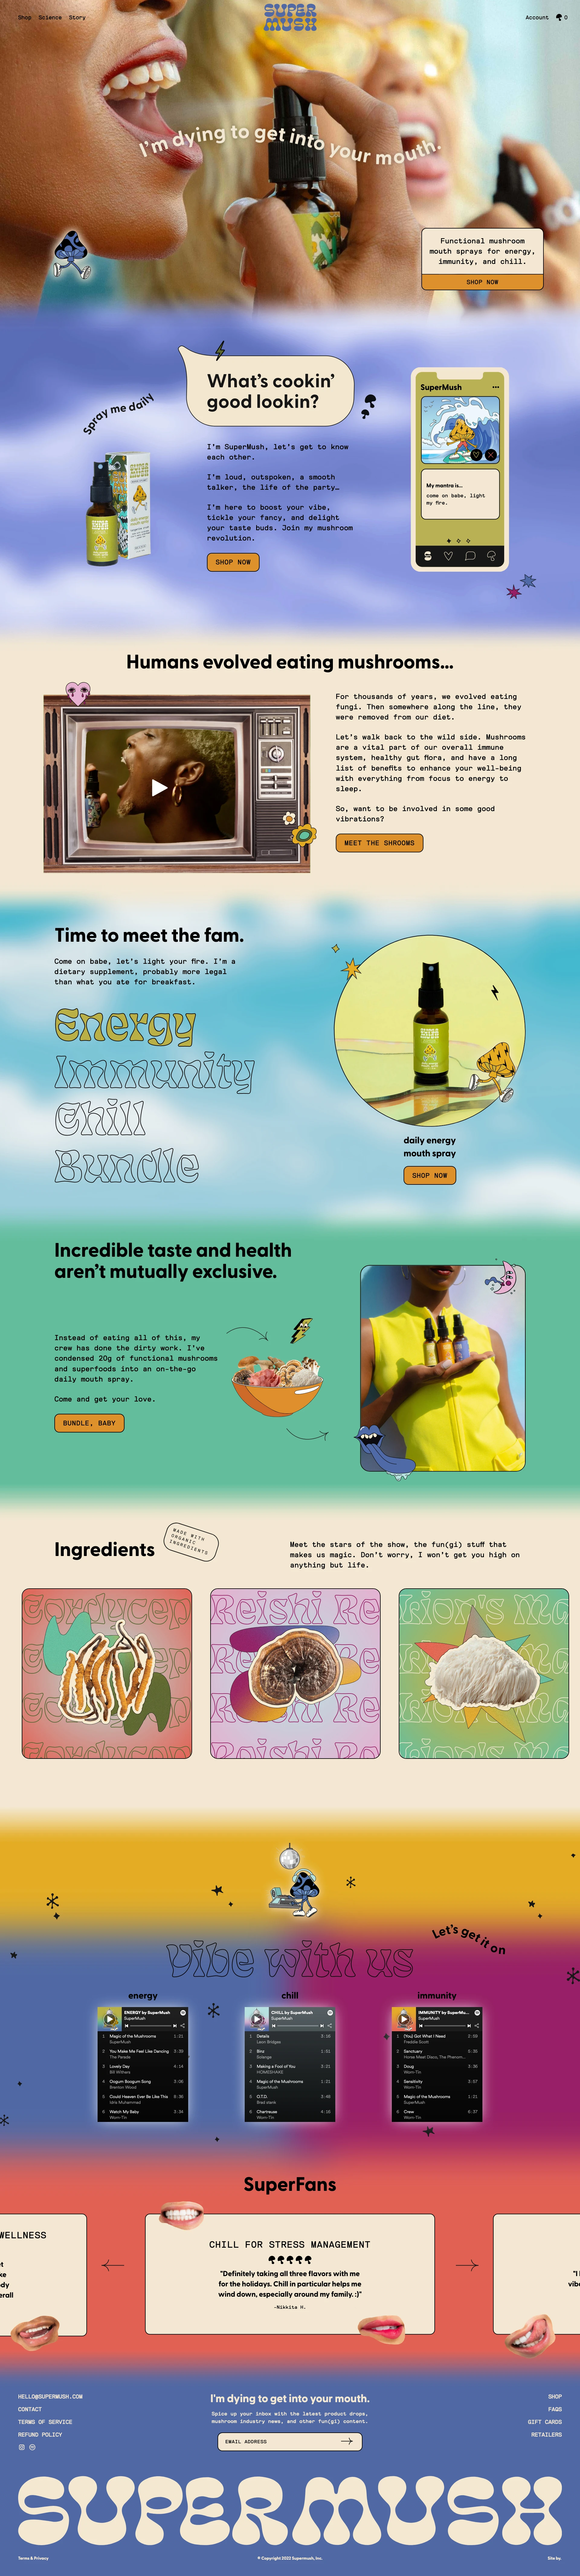 SuperMush Landing Page Example: When superfoods and mushrooms collide, SuperMush magic is born. Humans evolved eating mushrooms, let's get that daily dose back into your world.